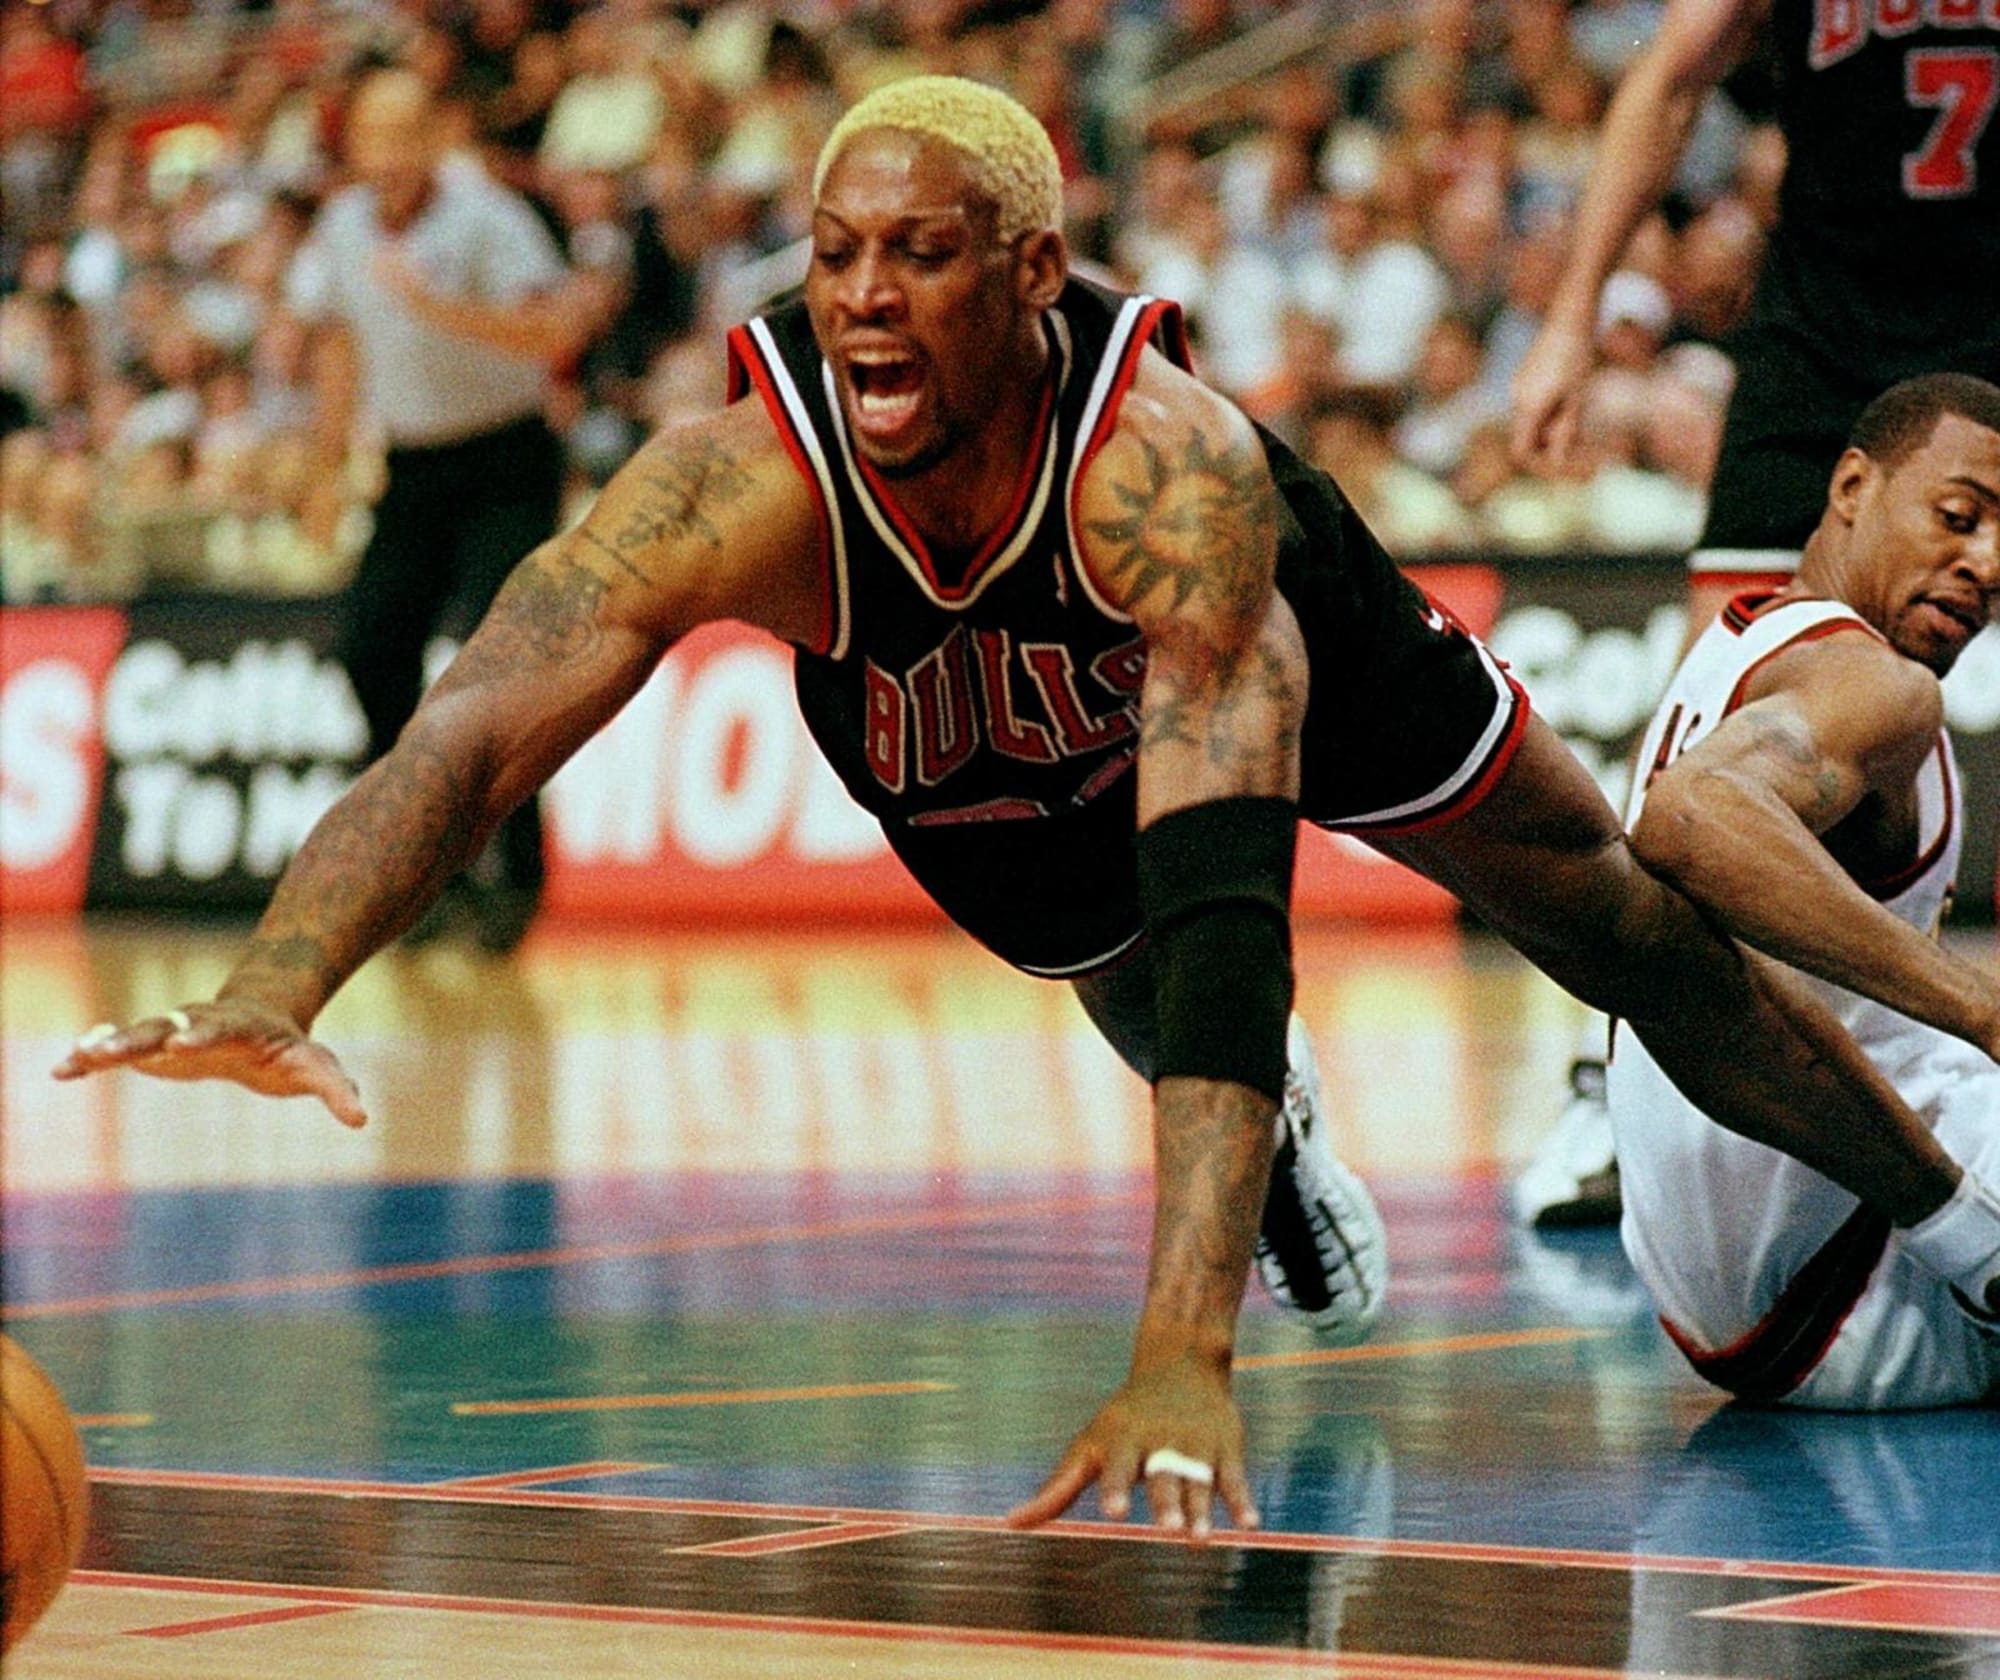 Dennis Rodman of the Los Angeles Lakers looks on against the